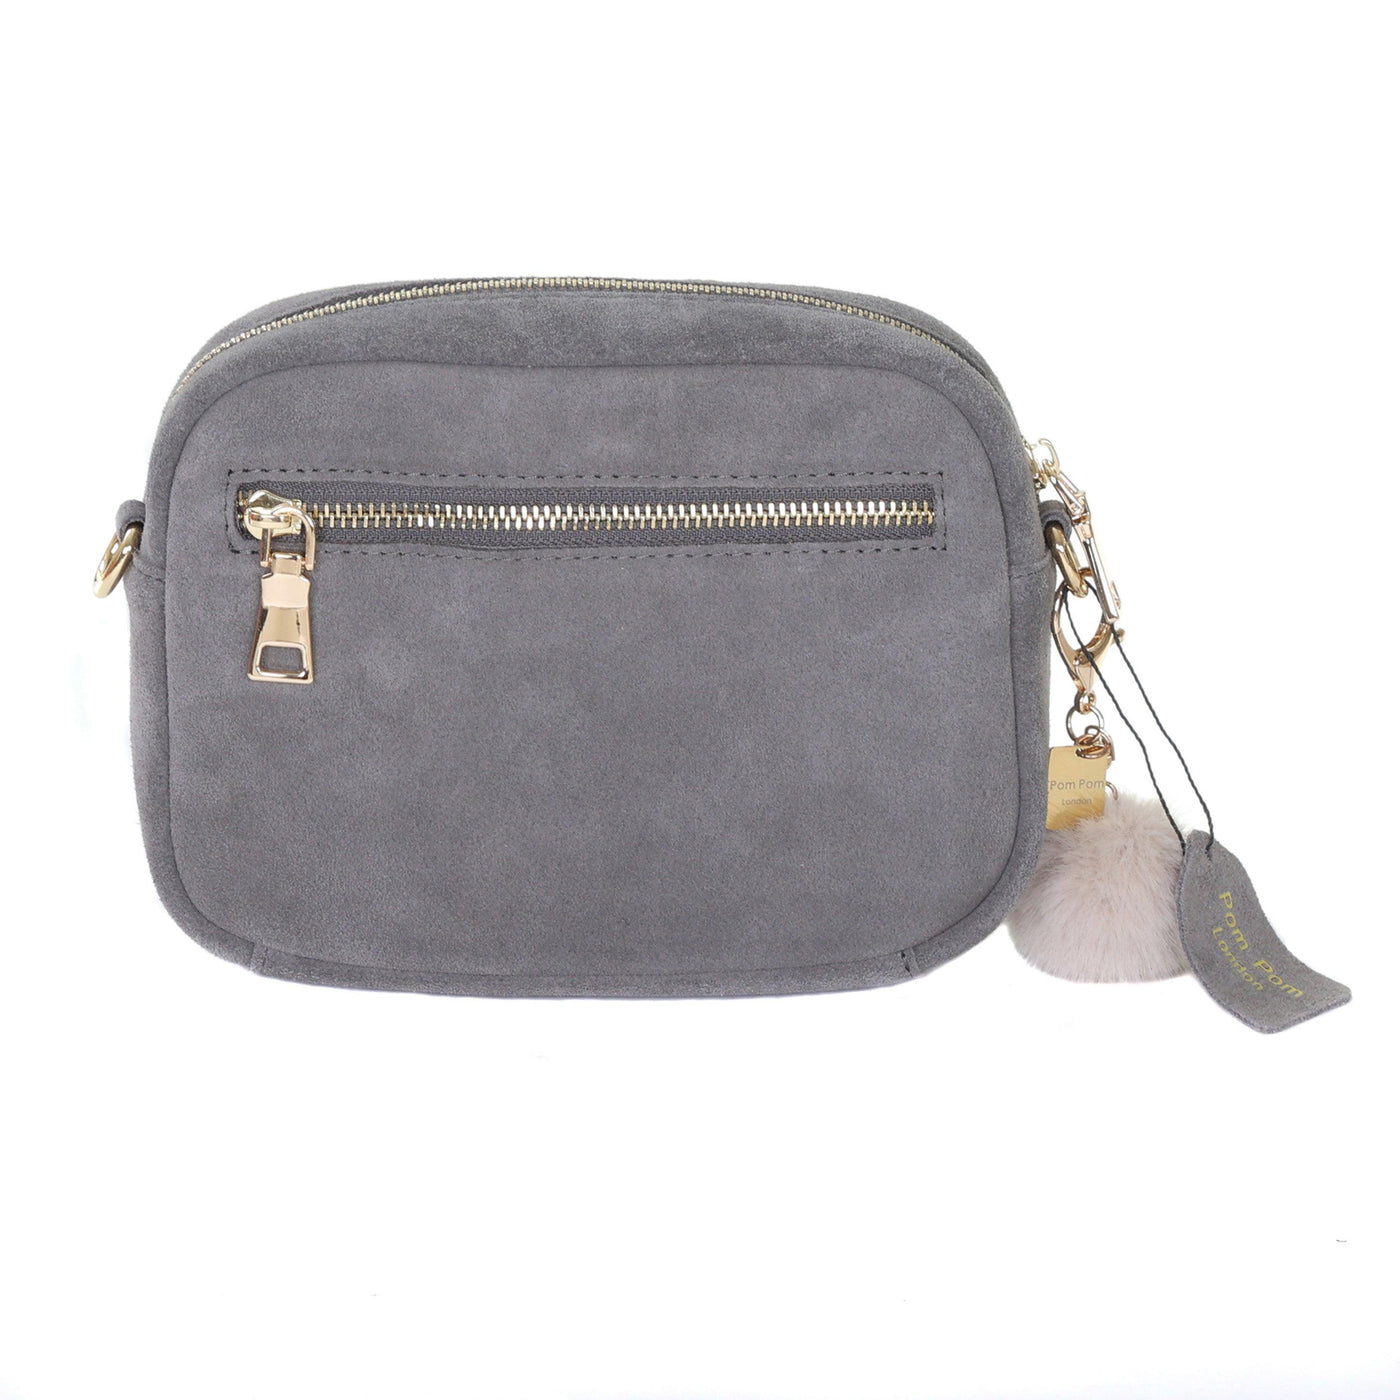 Mayfair Suede Bag Charcoal & Accessories